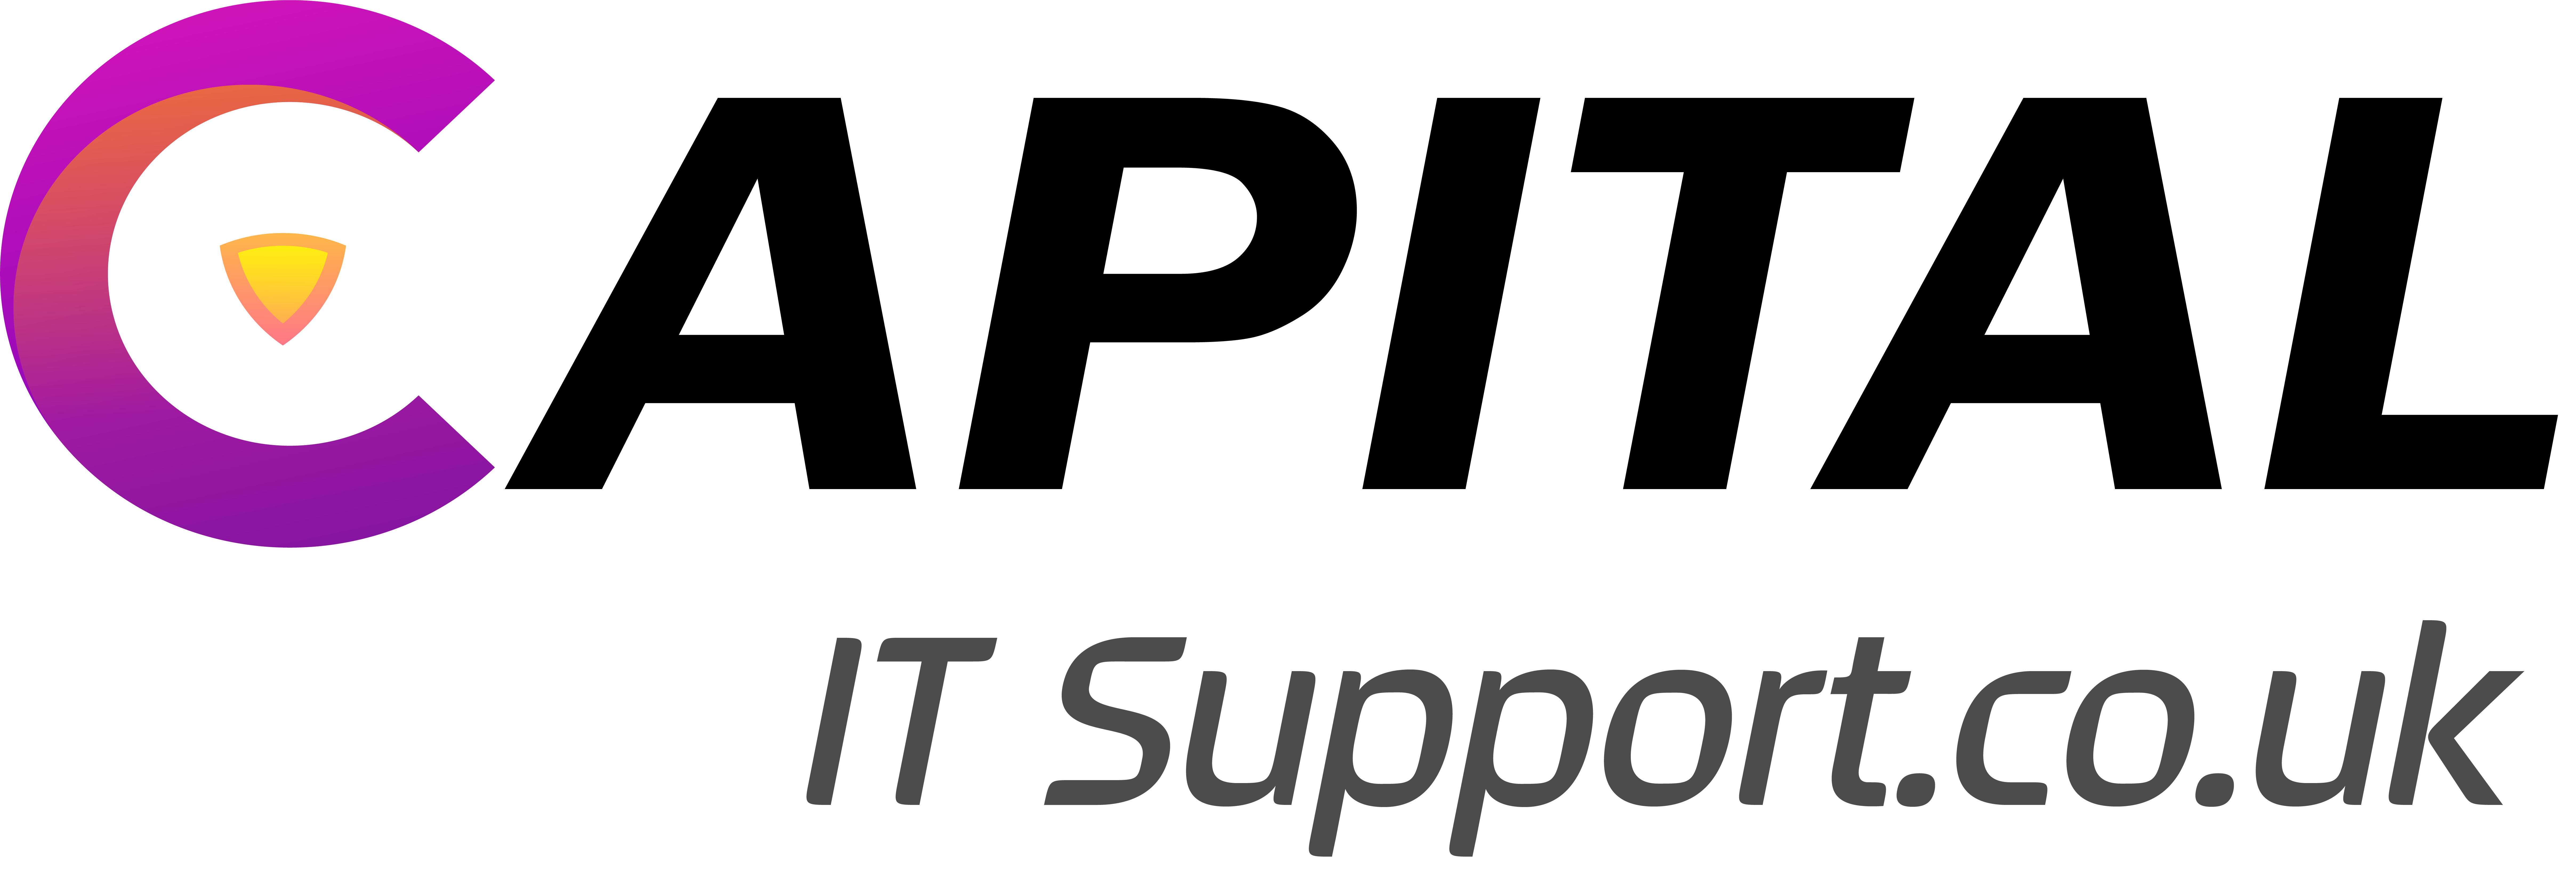 Captial IT Support Logo